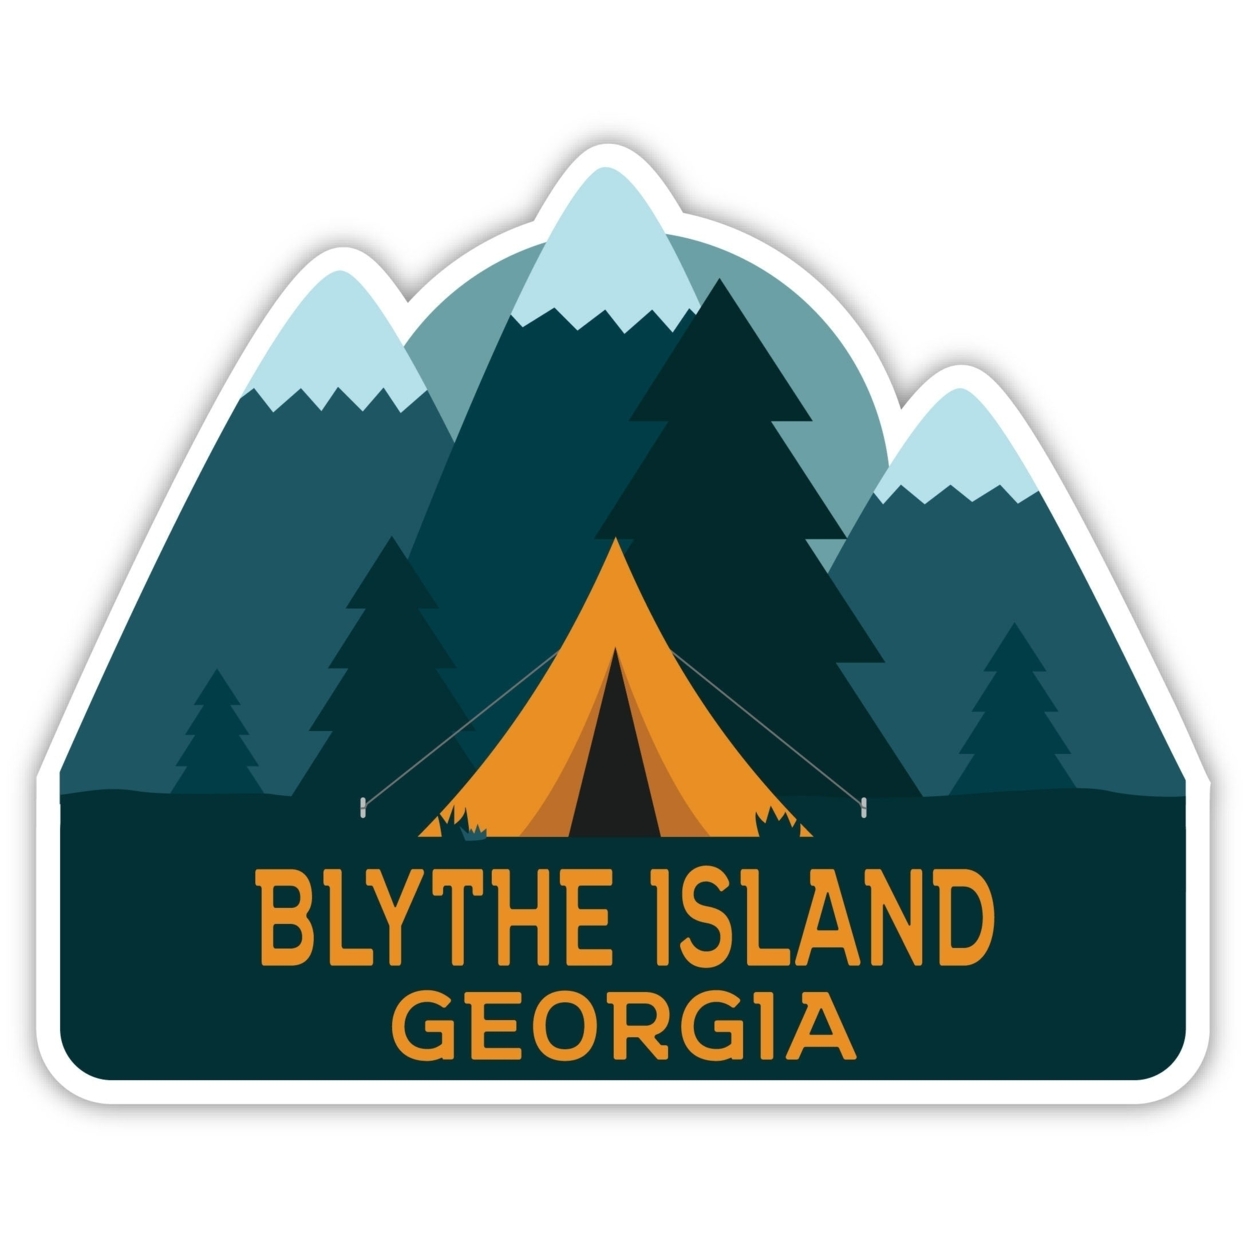 Blythe Island Georgia Souvenir Decorative Stickers (Choose Theme And Size) - Single Unit, 10-Inch, Great Outdoors